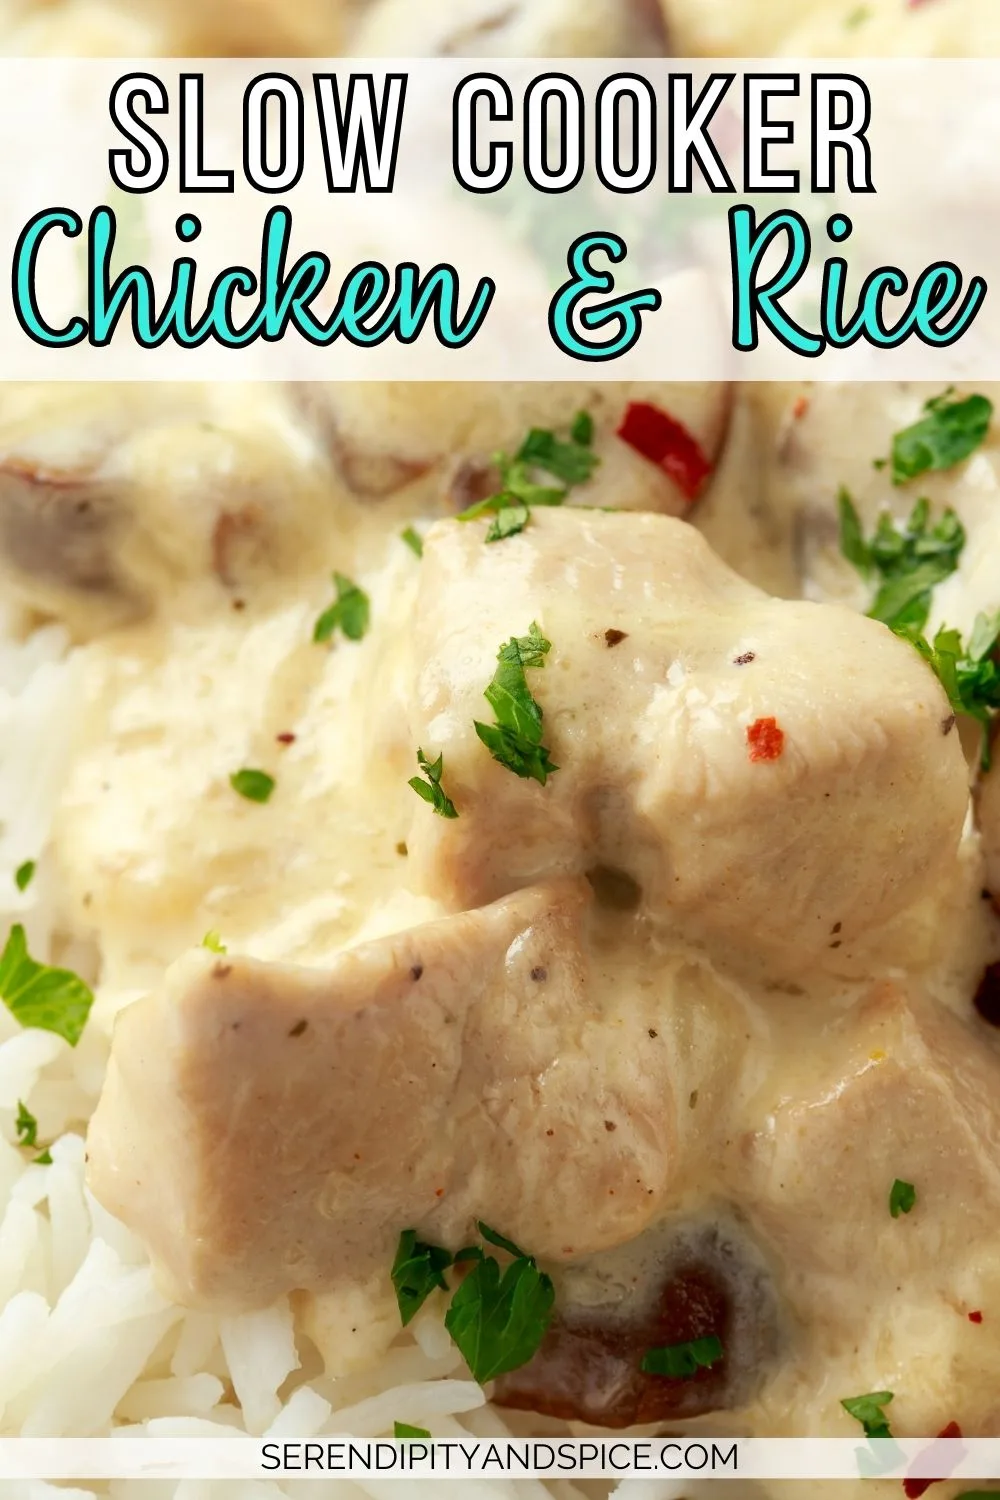 Easy Chicken and Rice Recipe - Baked in the Oven and Super Creamy